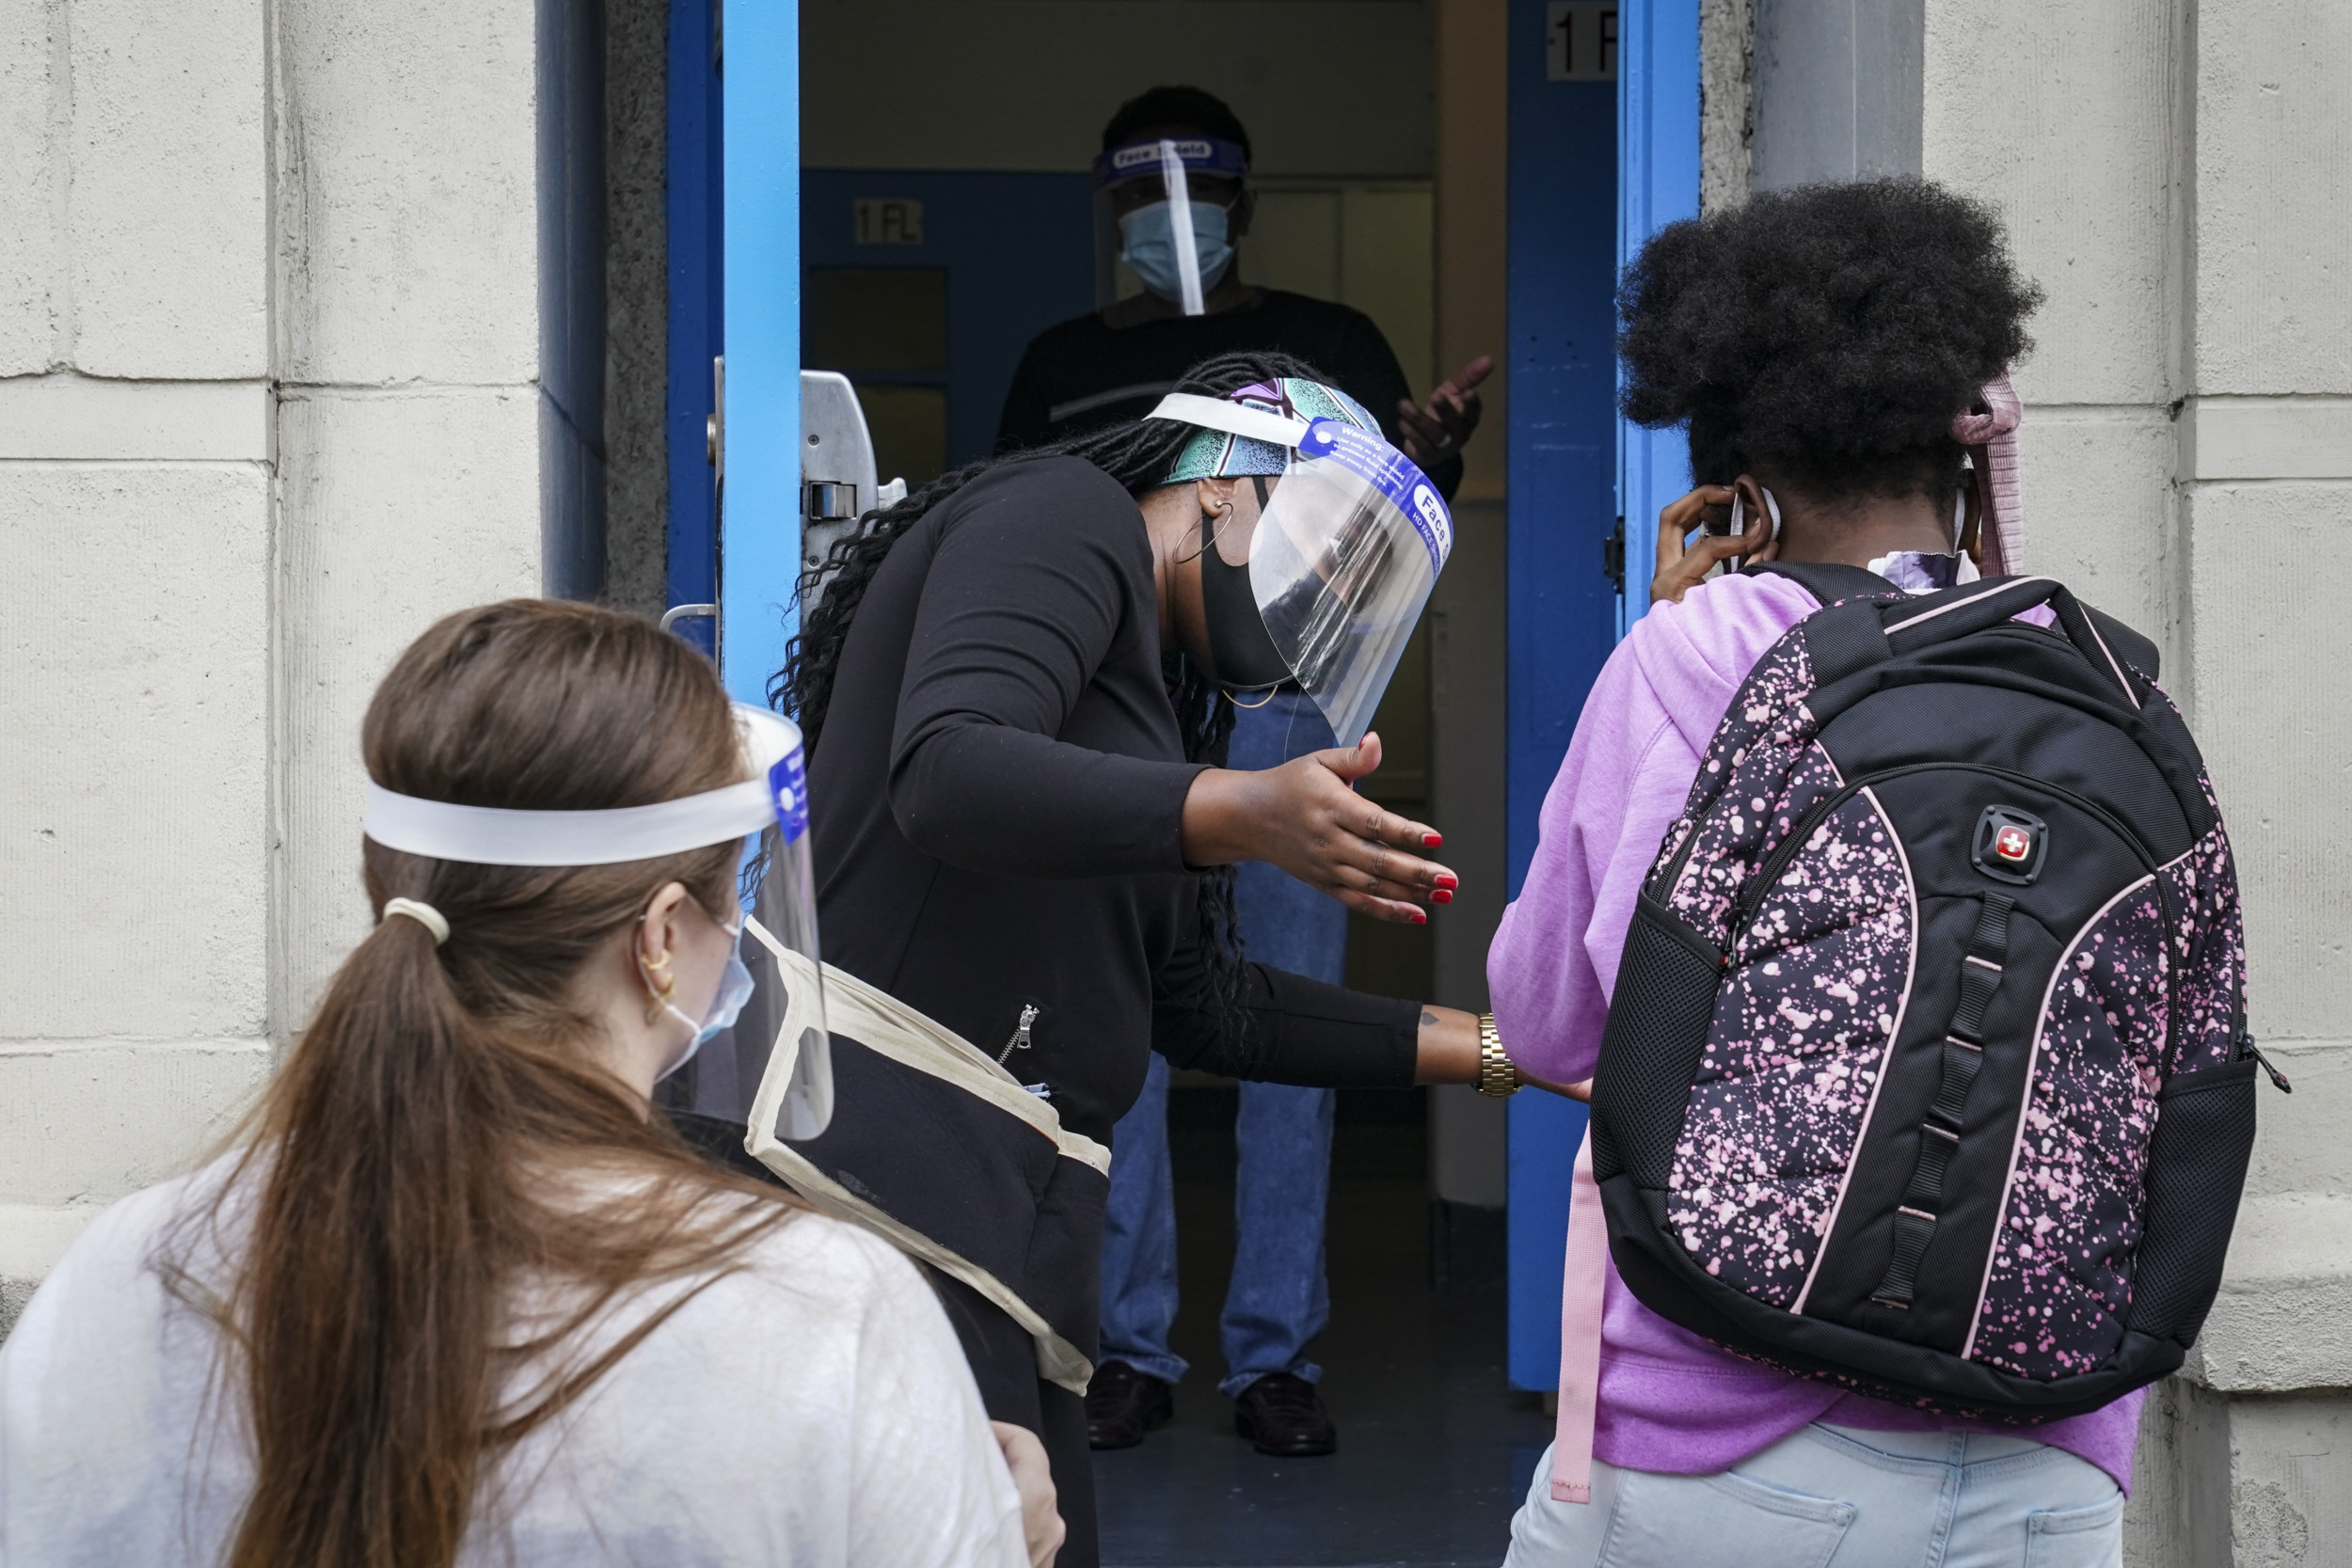 Foster Care Child Removal: Asult in plastic dac shield and face mask stands in doorway gesturing to dark-haired person with multi-colored backpack while another person waits in line